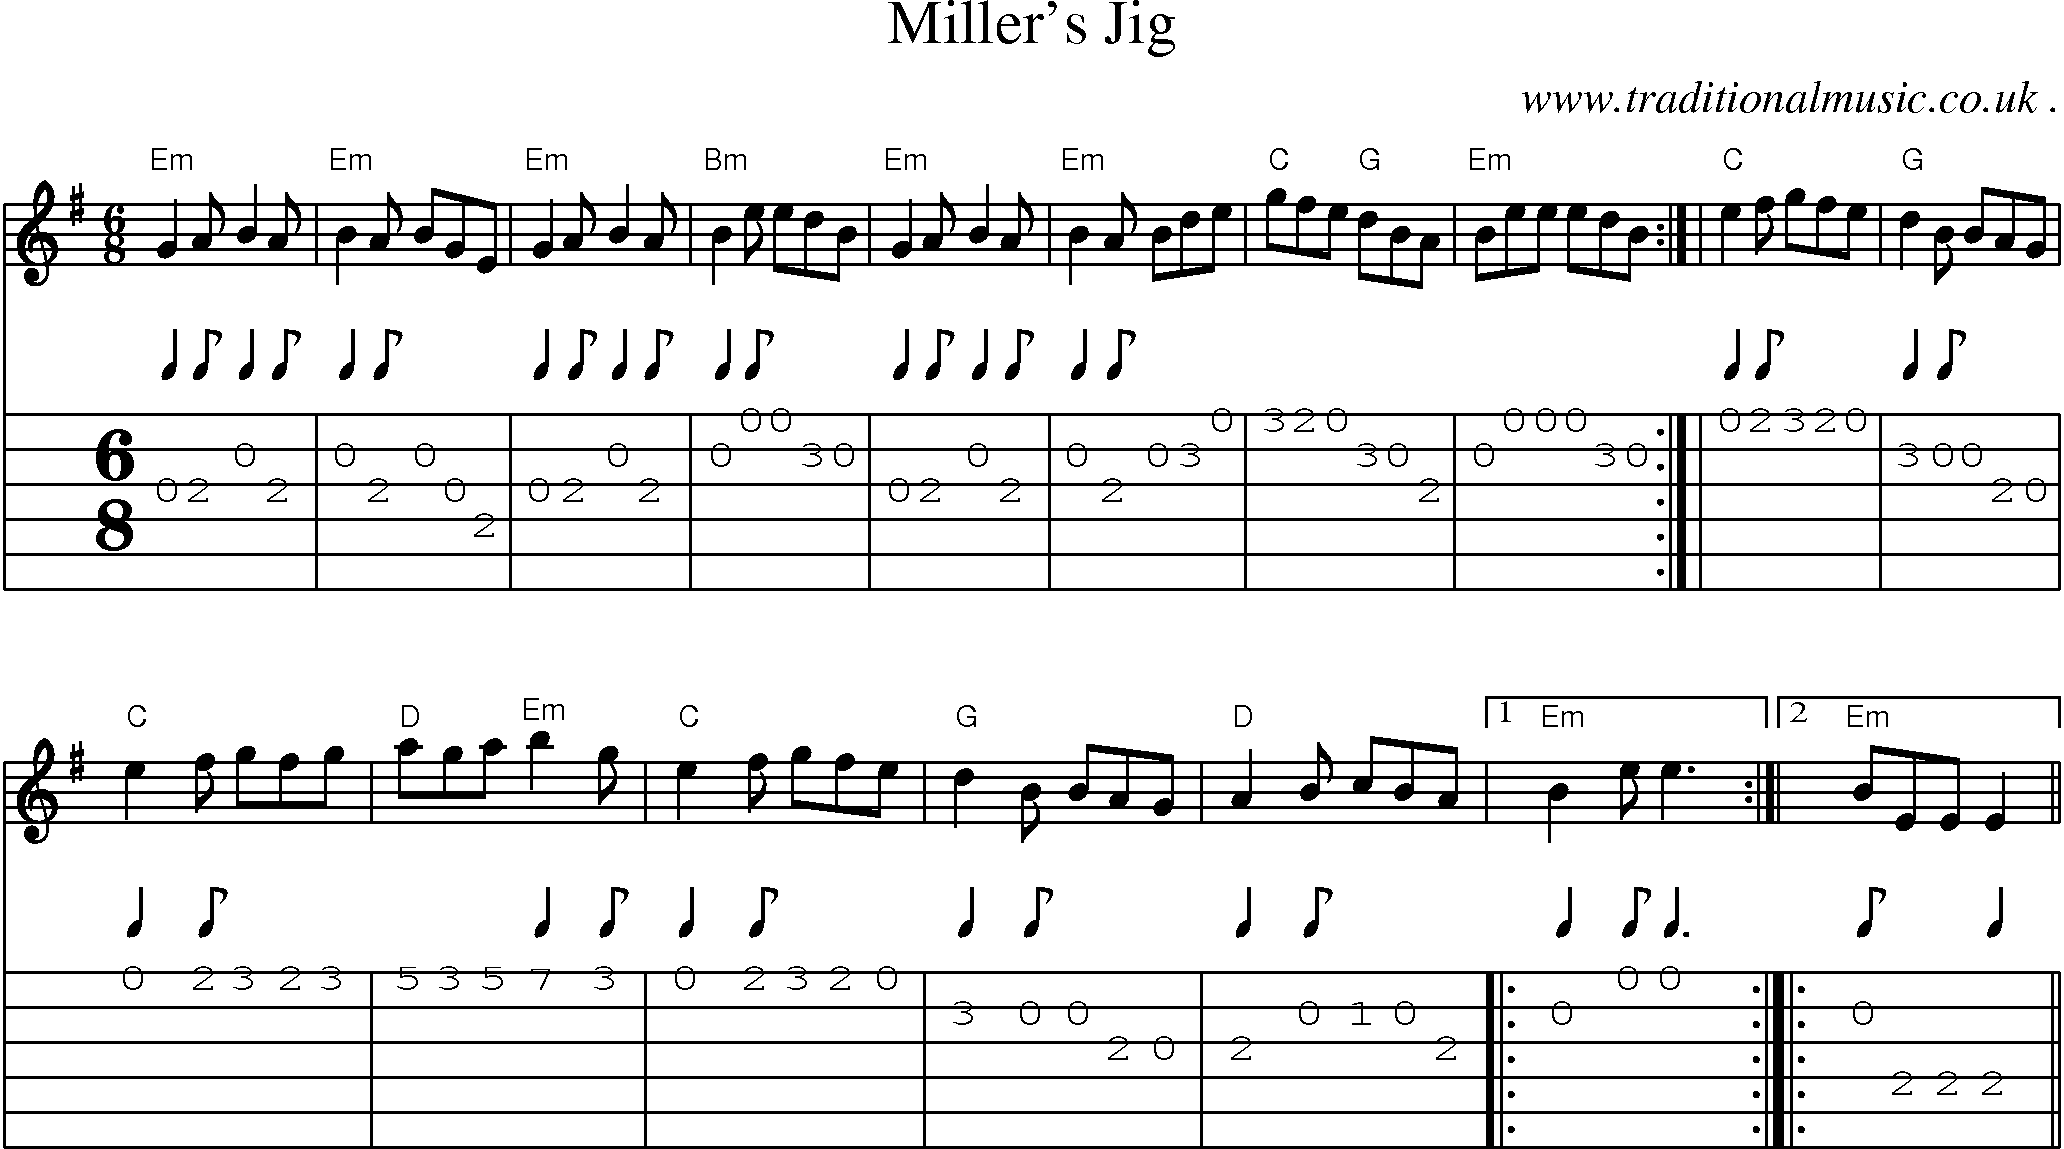 Sheet-music  score, Chords and Guitar Tabs for Millers Jig